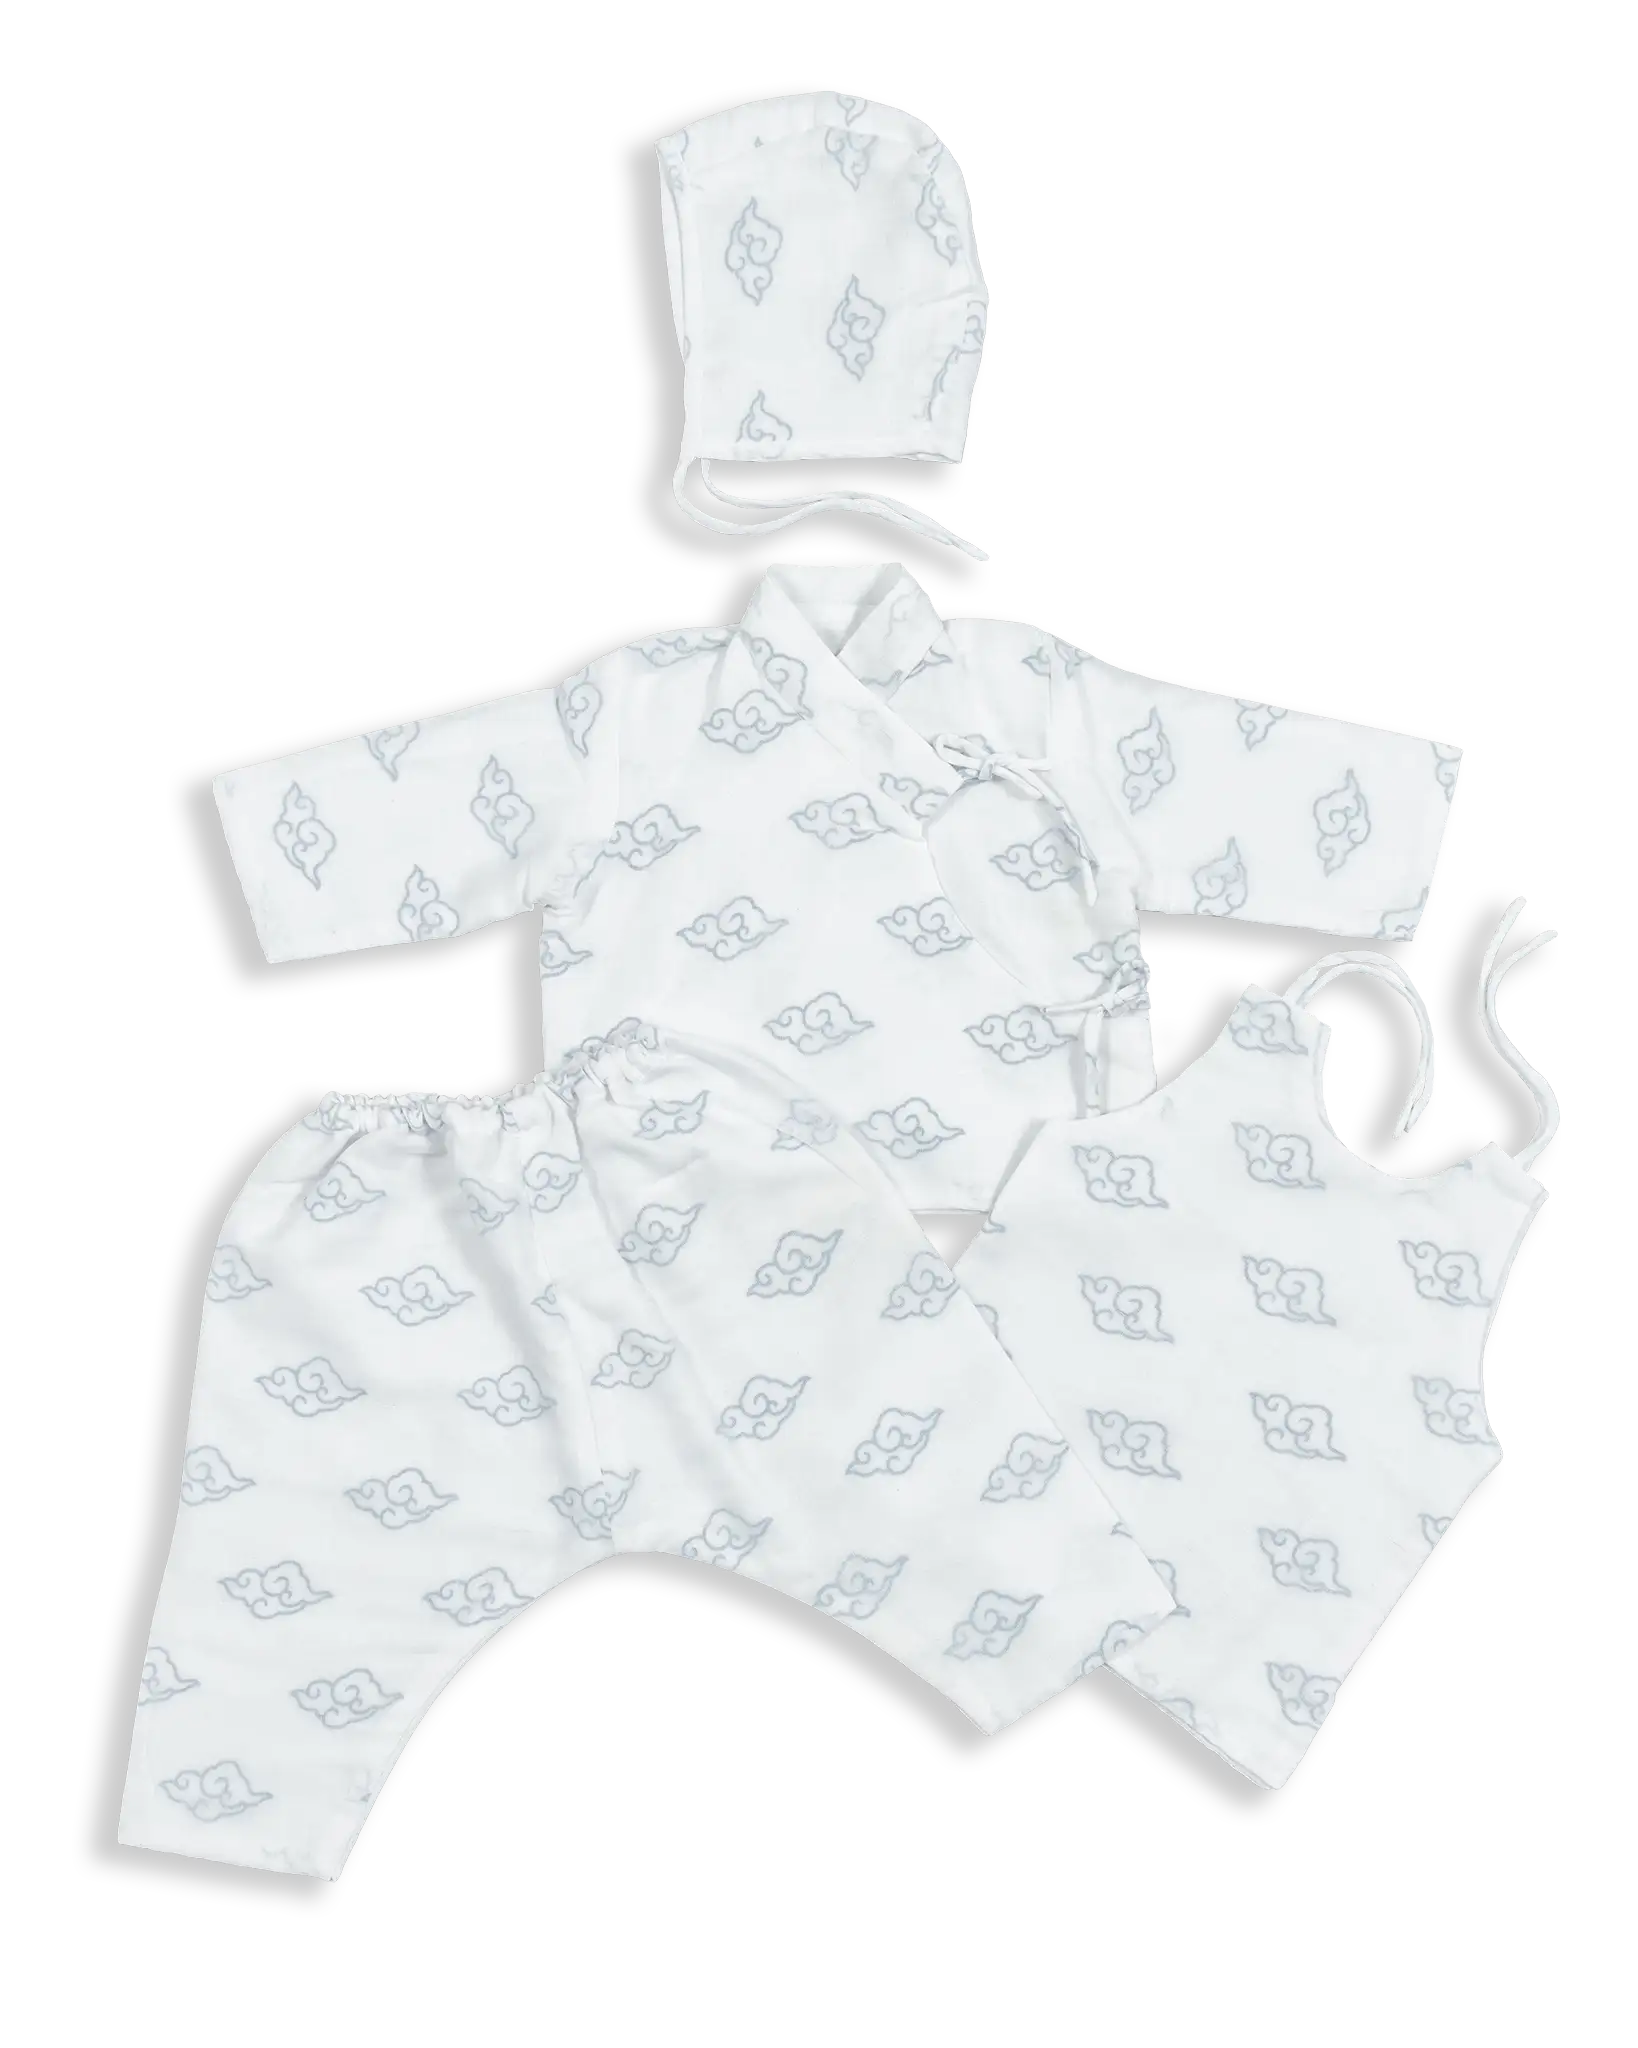 Traditional Nepali trousers, Bhoto, Overcoat and Hat in a centuries-old design called Daura Suruwal lined with breathable fine muslin to protect the baby from cold or heat.